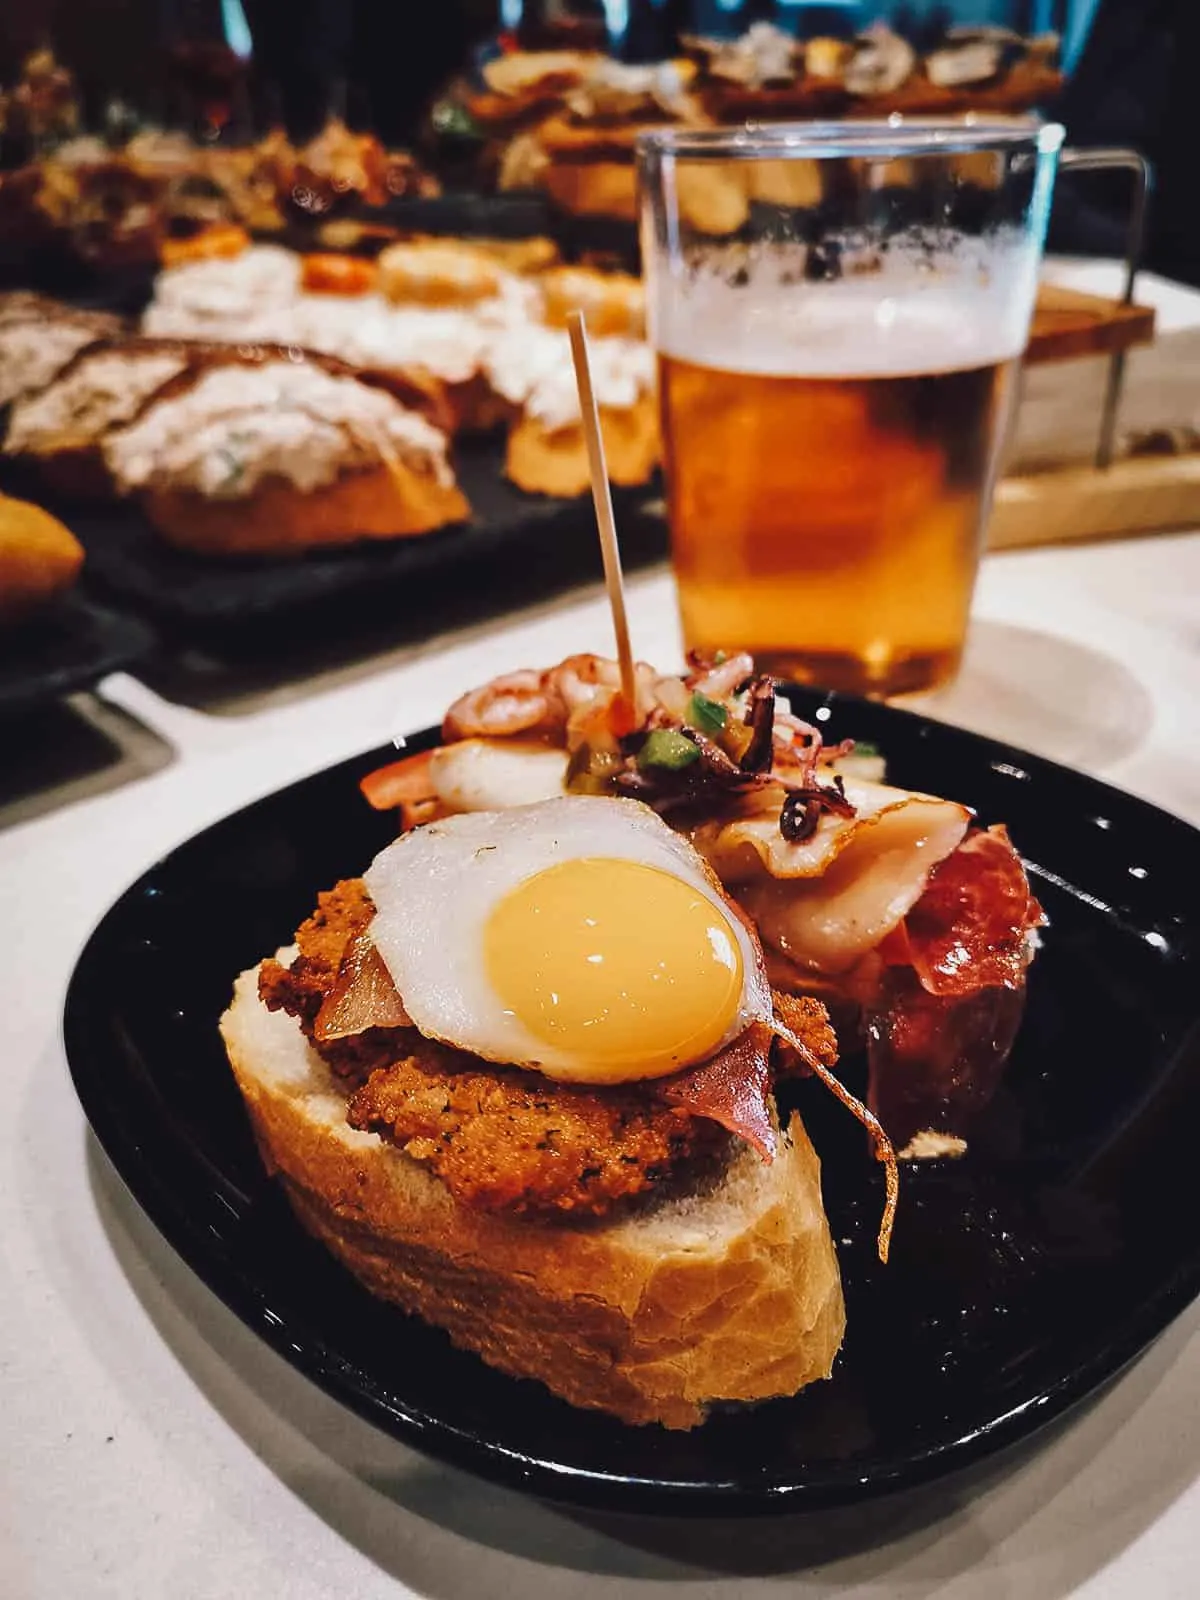 Pair of pintxos on a plate with beer